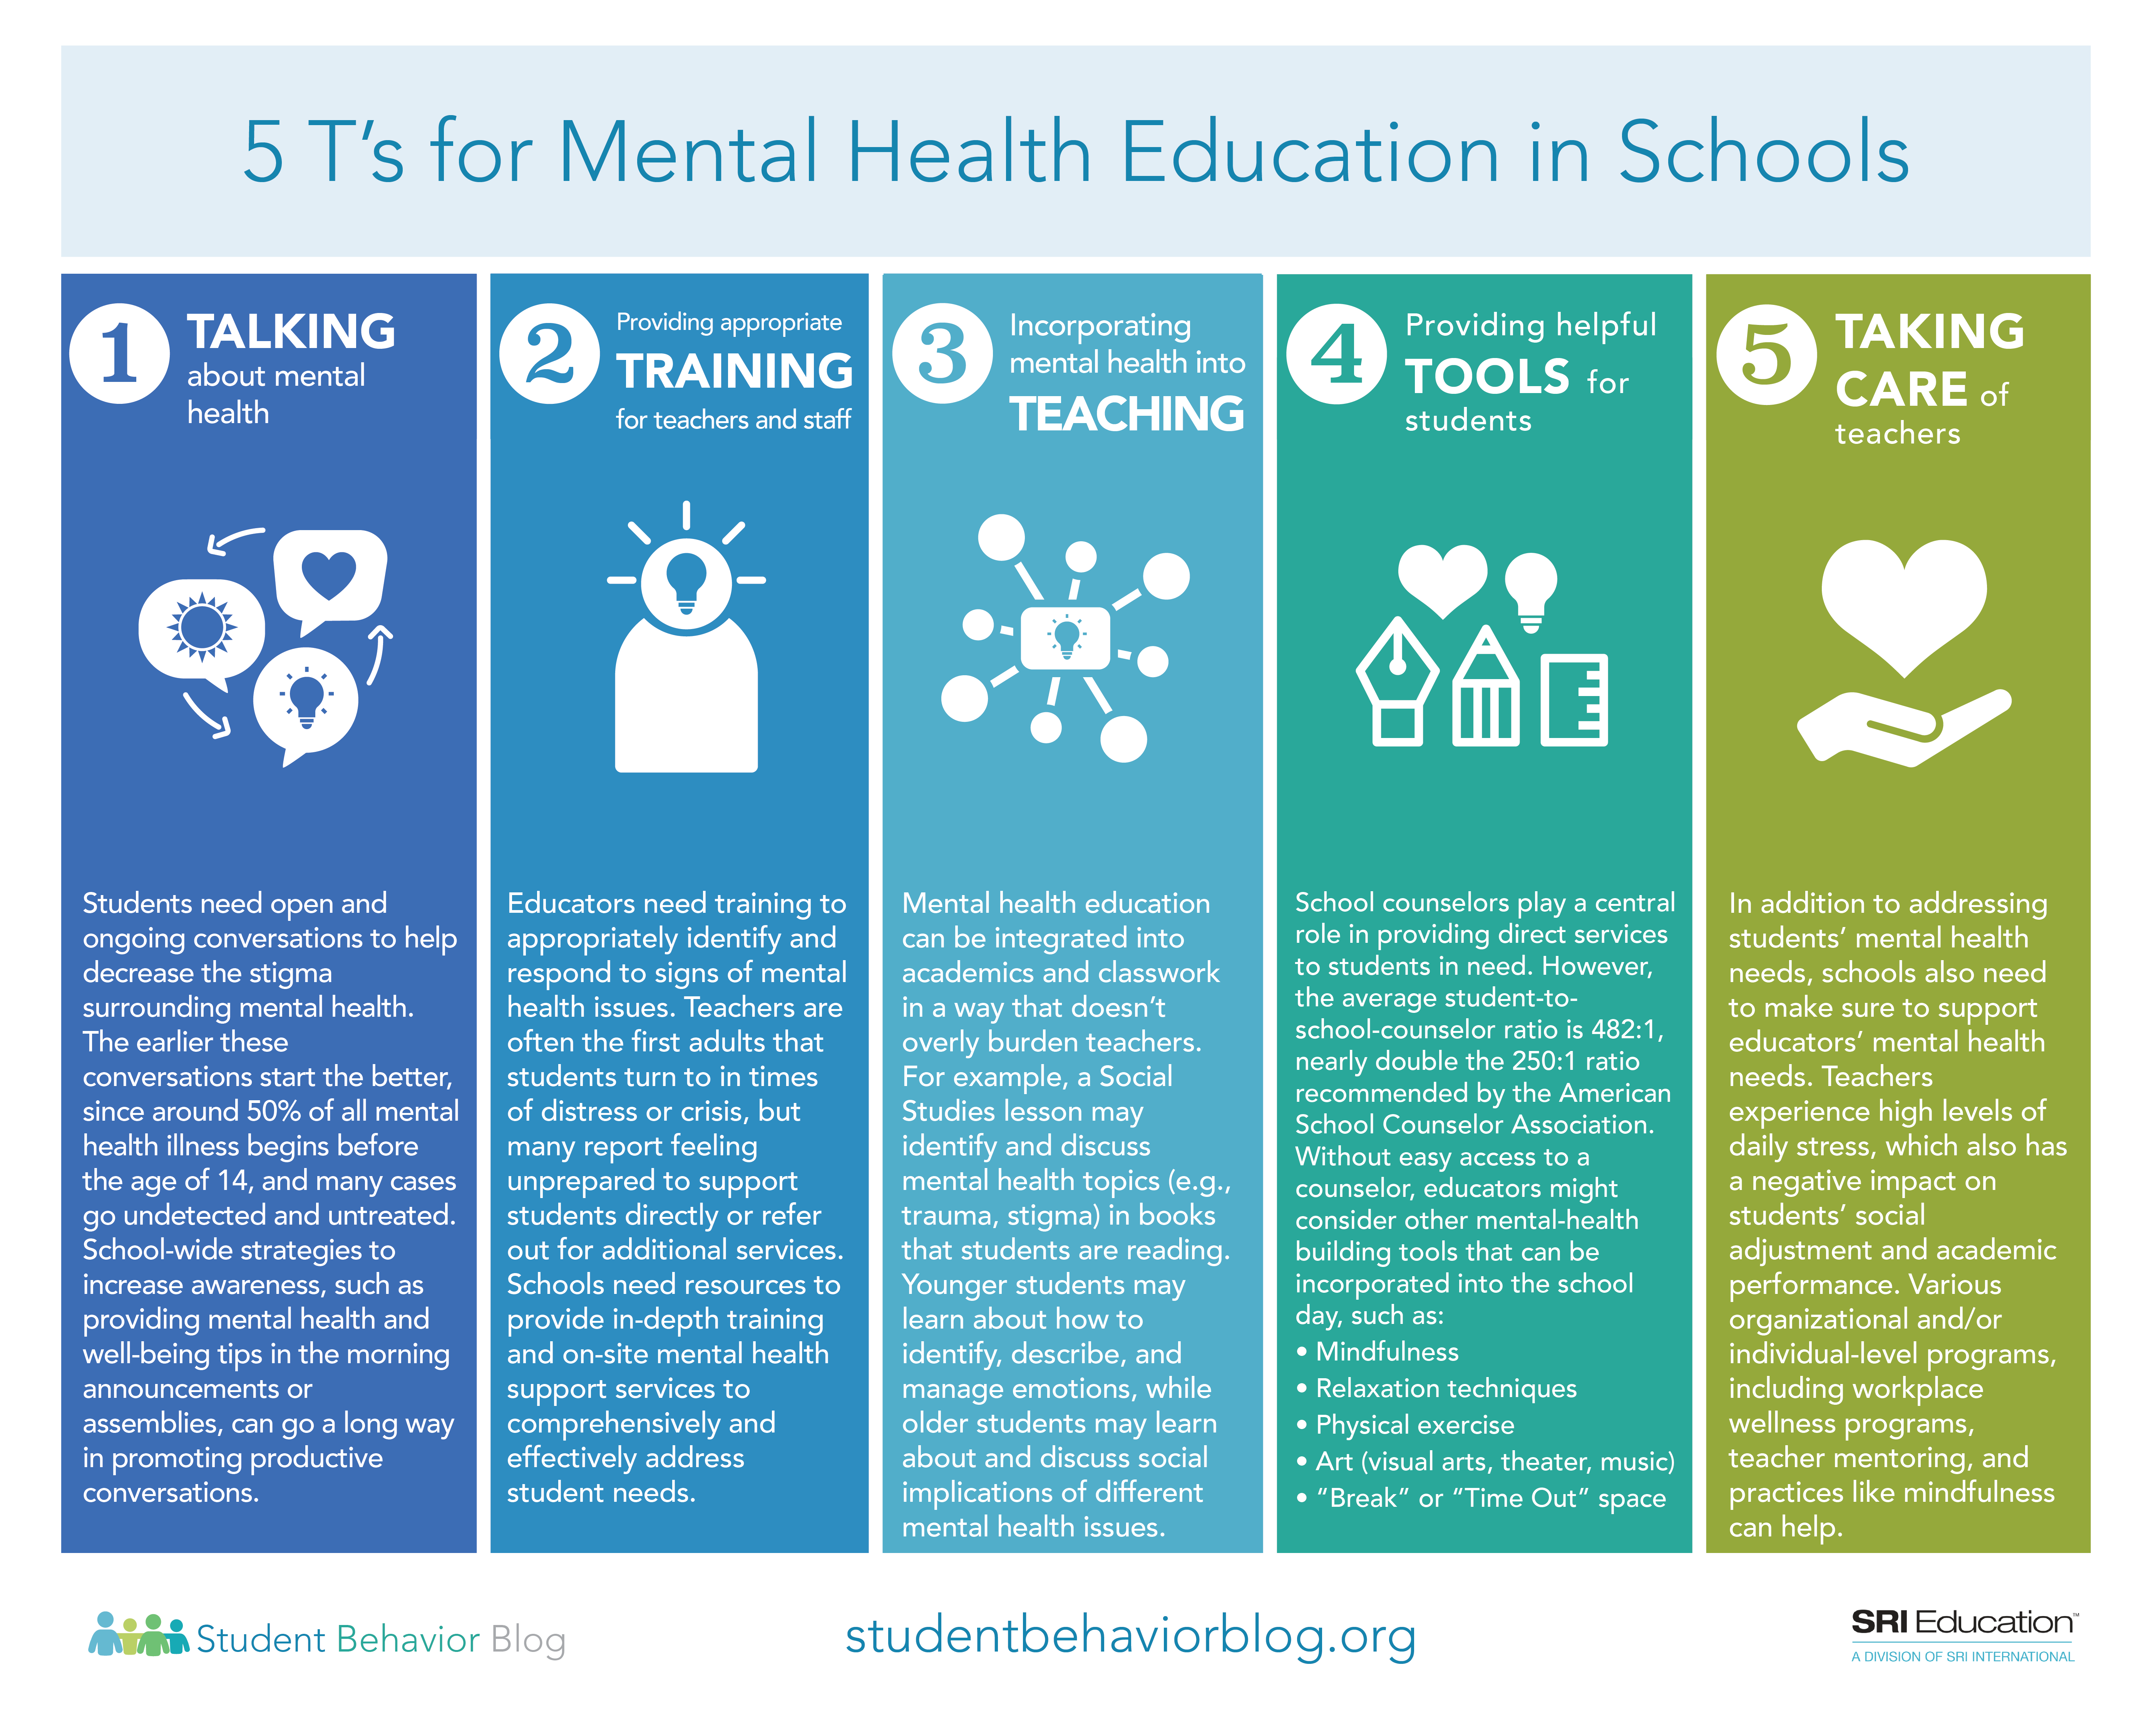 5 T’s for Mental Health Education in Schools